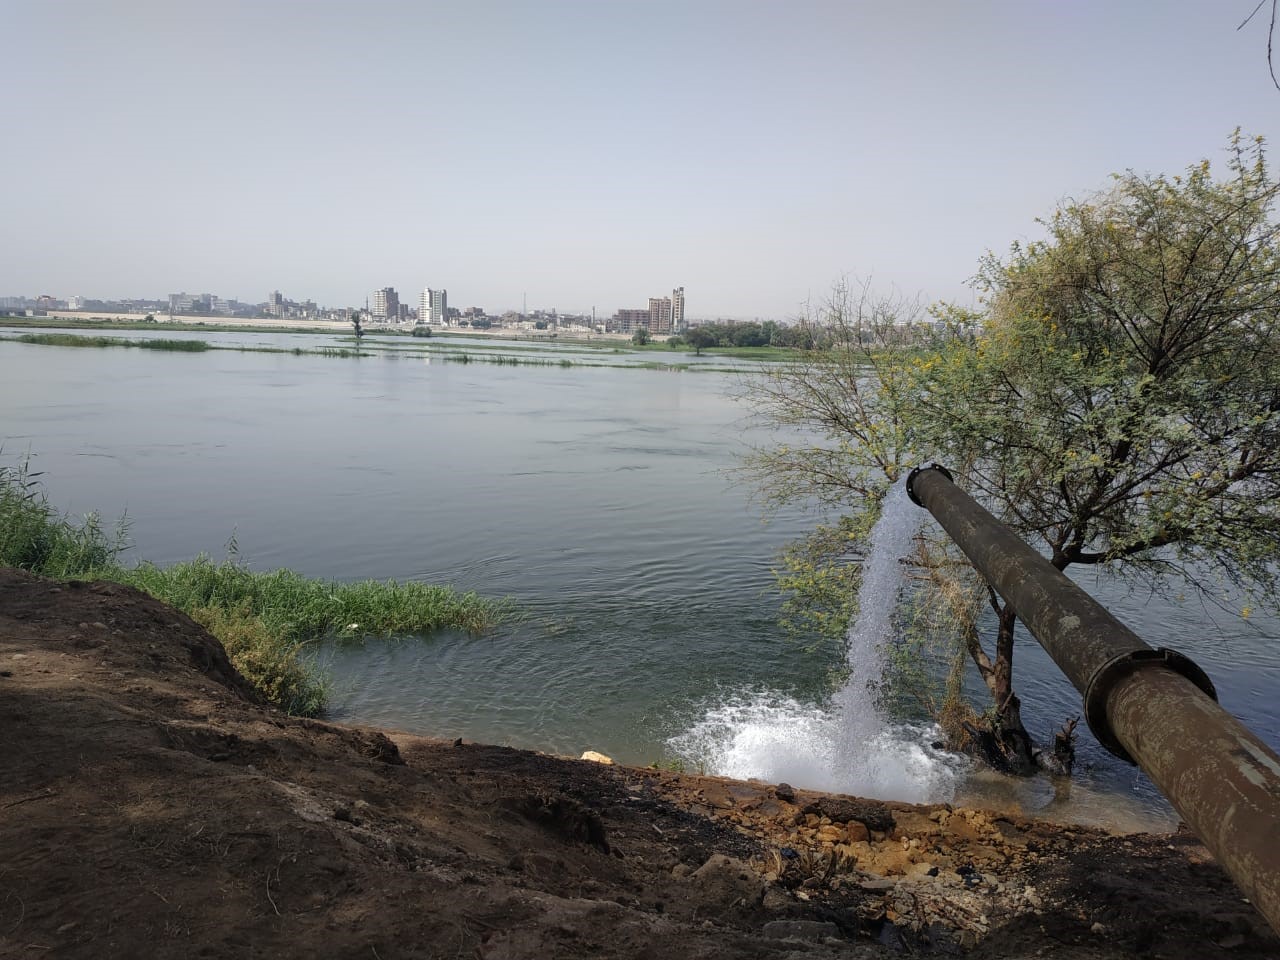 The water is being discharged in the Nile until the water quality is stabilized according to the Egyptian water quality standard in Bani Morr, Assiut and then it will be pumped directly into the local water network to feed the targeted vulnerable population